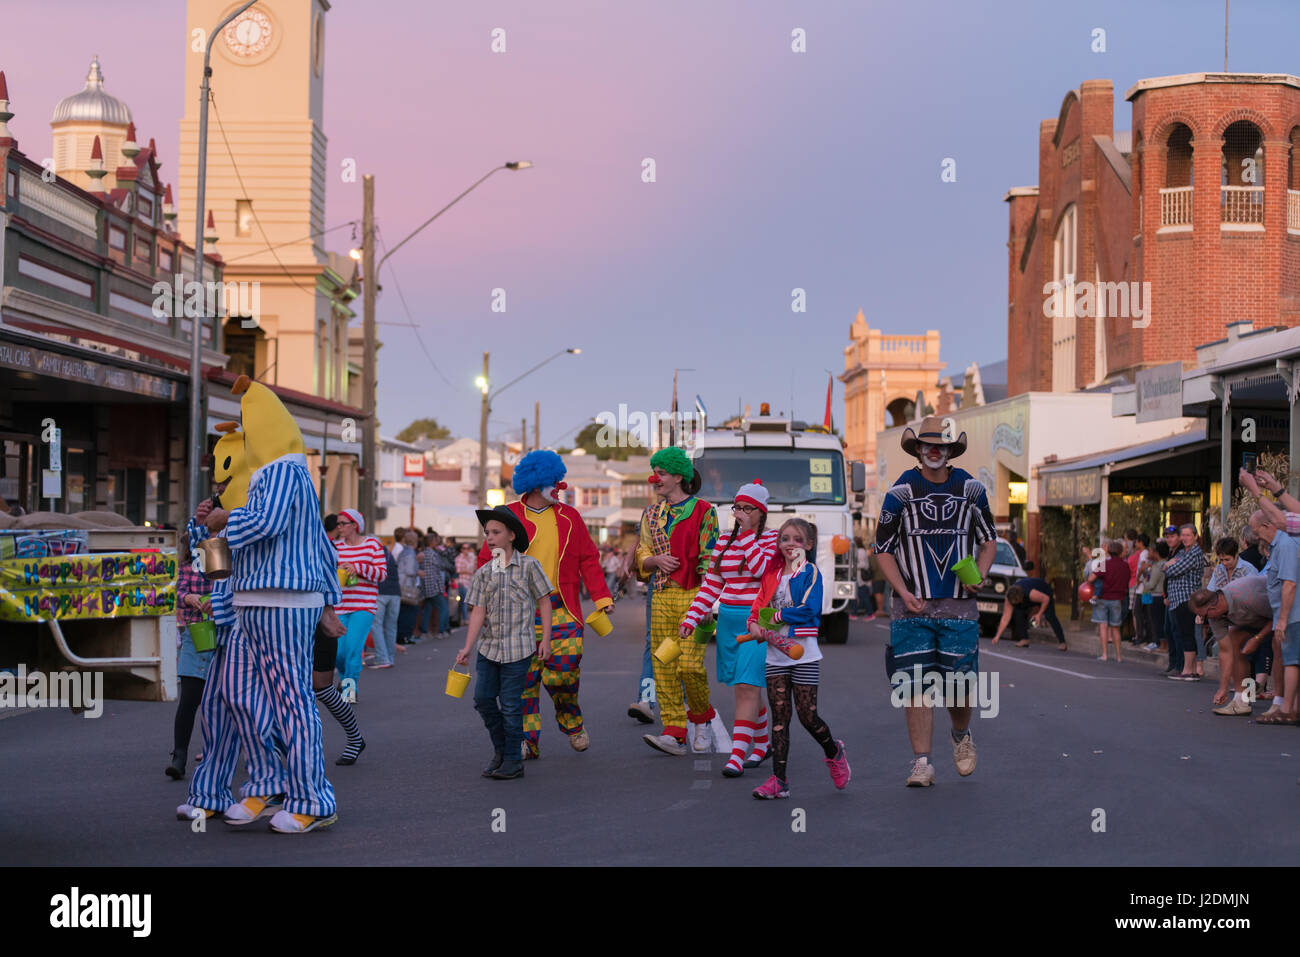 Charters Towers, Australia. 28th April, 2017. Participants in the 40th Charters Towers Country Music parade, Charters Towers, Australia Credit: Sheralee Stoll/Alamy Live News Stock Photo